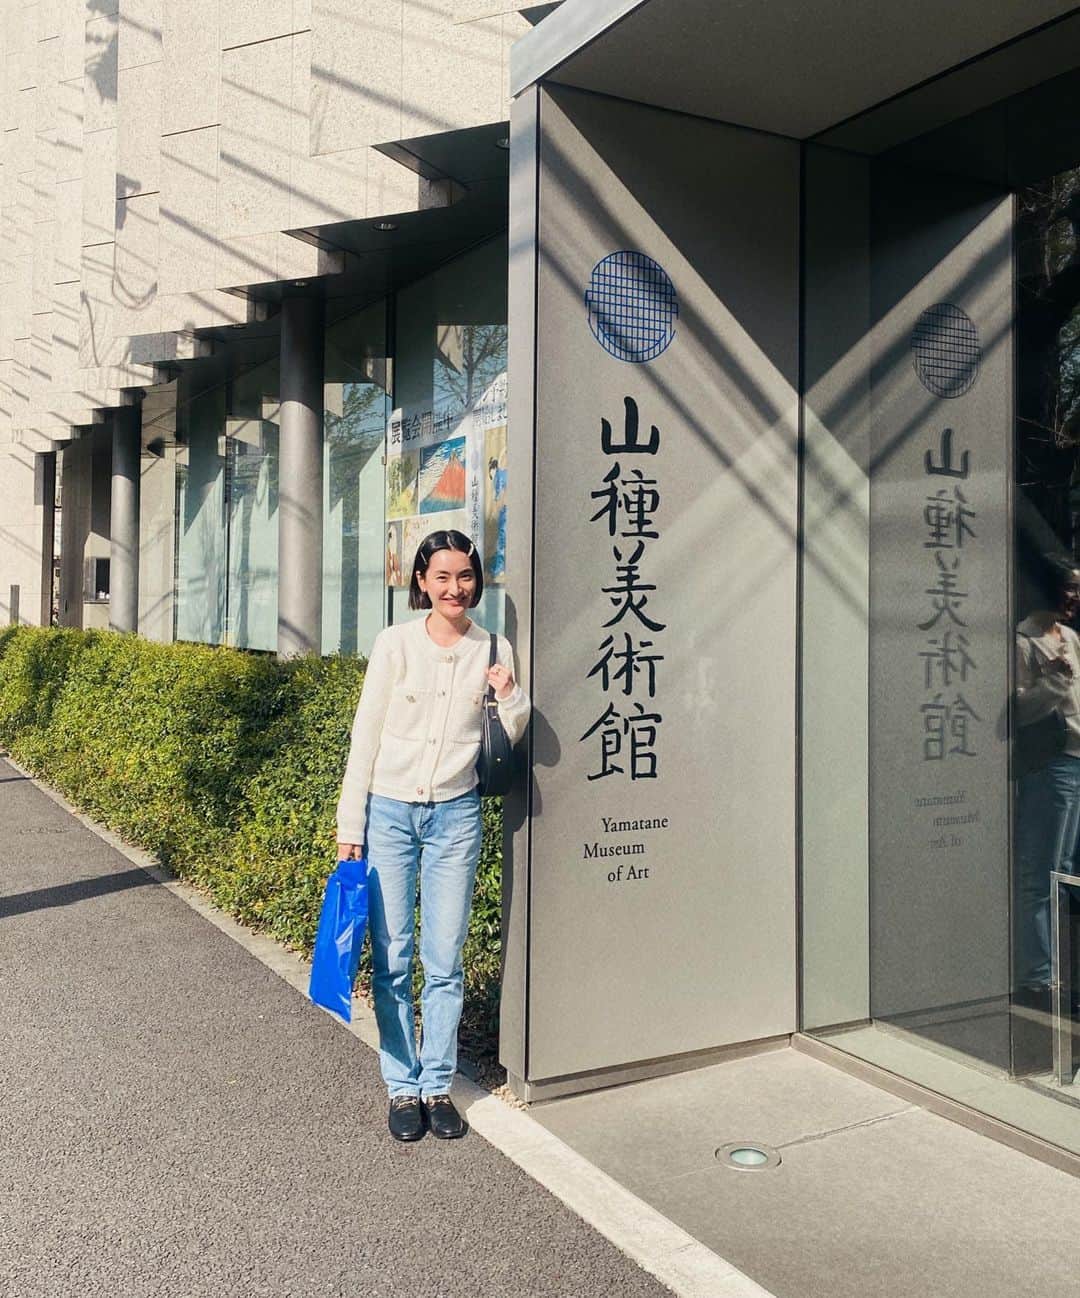 浅見姫香さんのインスタグラム写真 - (浅見姫香Instagram)「I went to "Fuji and Sakura" to commemorate the 10th anniversary of the World Heritage registration.  Mt.Fuji is the highest mountain in Japan and has been revered as a sacred mountain, called "the source of art".  Until 1872 (Meiji period), women were not allowed to climb the mountain, but some women disguised themselves as men to climb it.  Katsushika Hokusai's "Thirty-six Views of Mt. Fuji" is famous, but another masterpiece, "One Hundred Views of Mt.  Yamamoto Shunkyo's "Susono no Haru" has a house with a thatched roof and cherry blossoms peeking through the trees.  Mt.Fuji towering in gentle colors in the background.  In addition, Mt. Fuji drawn by various artists is exhibited.  The exhibition will be held at the Yamatane Museum of Art until May 14th.  世界遺産登録10周年記念「富士と桜」へ。 富士山は、芸術の源泉と呼ばれ、霊山として崇められてきた日本一高い山。 1872年(明治時代)までは、女子禁制の山でしたが、男性に扮して登った女性もいたり。そんな昔の人々も魅了してきた富士山、江戸時代からよく描かれるようになりました。 葛飾北斎の「富嶽三十六景」は有名ですが、もう1つの傑作と呼ばれている墨摺絵で描かれた「富嶽百景」も展示されてあります。 山元春挙作の「裾野の春」では、茅葺き屋根の家があり、木の間からは桜が覗く。背景には優しい色をし、大きくそびえ立つ富士山。 その他、色んな画家達が描く富士山が展示されてあります。山種美術館にて5月14日まで開催中。  #山種美術館 #富士山  #葛飾北斎  #ひめかのさんぽ」4月5日 19時44分 - himeka_asami_official